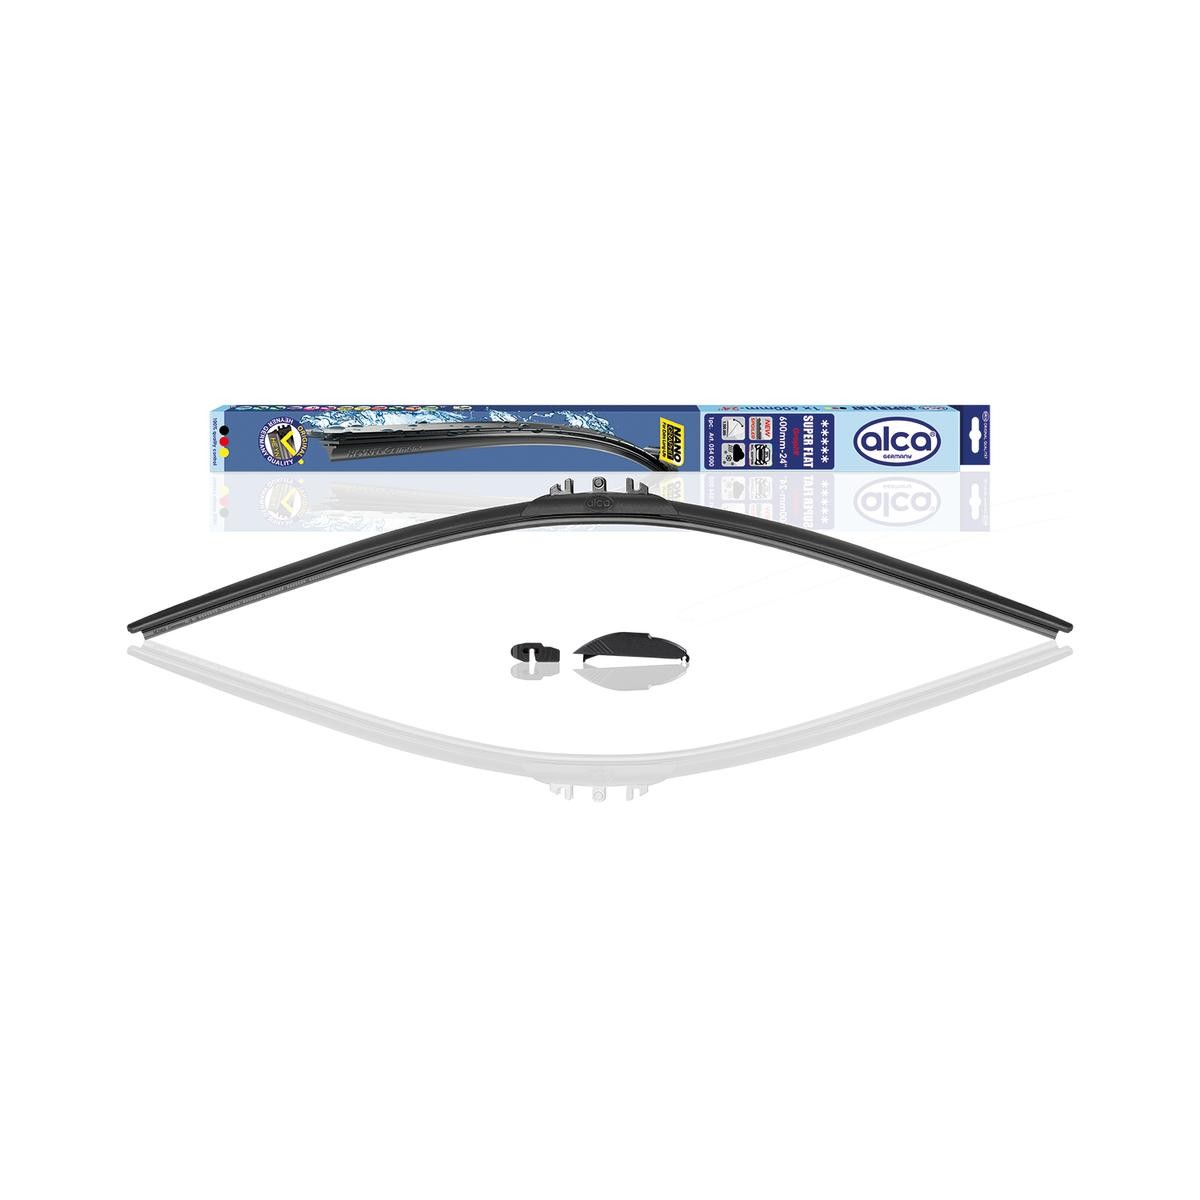 Windshield wipers ALCA SUPER FLAT 600 mm Front, 24 Inch - 05400A